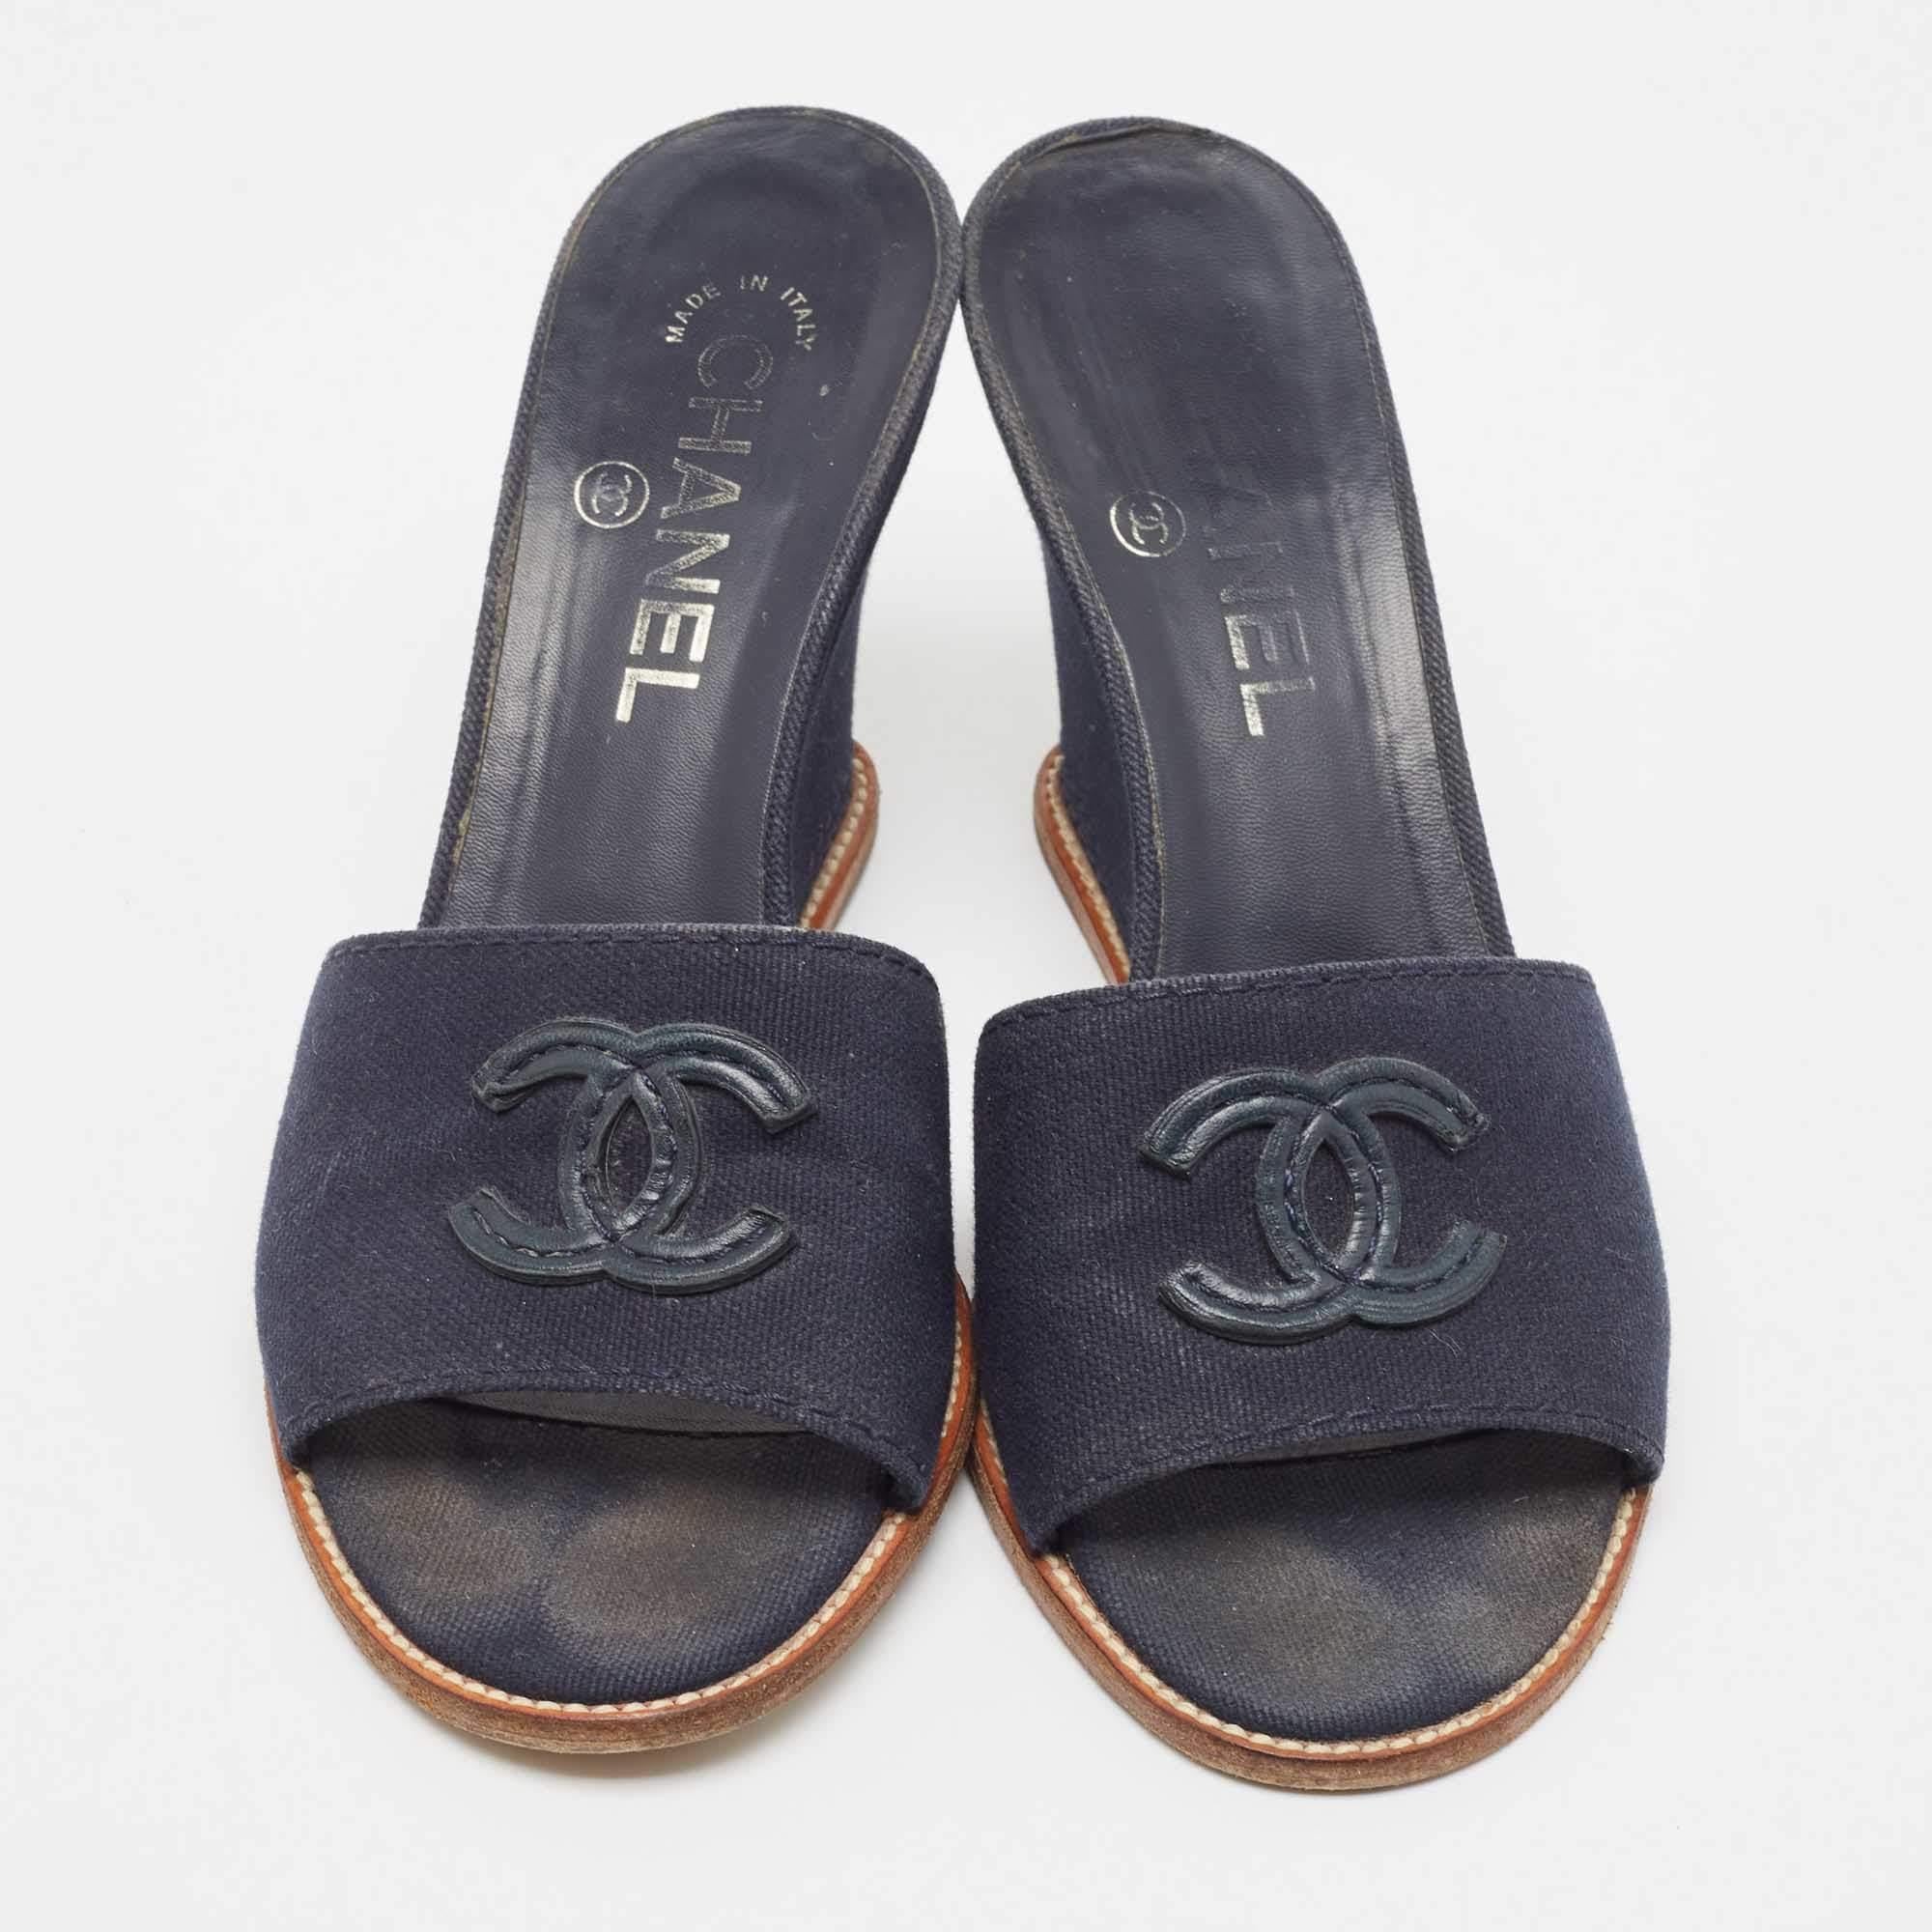 These timeless Chanel wedge slides for women are meant to last you season after season. They have a comfortable fit and high-quality finish.

Includes: Original Dustbag, Original Box

